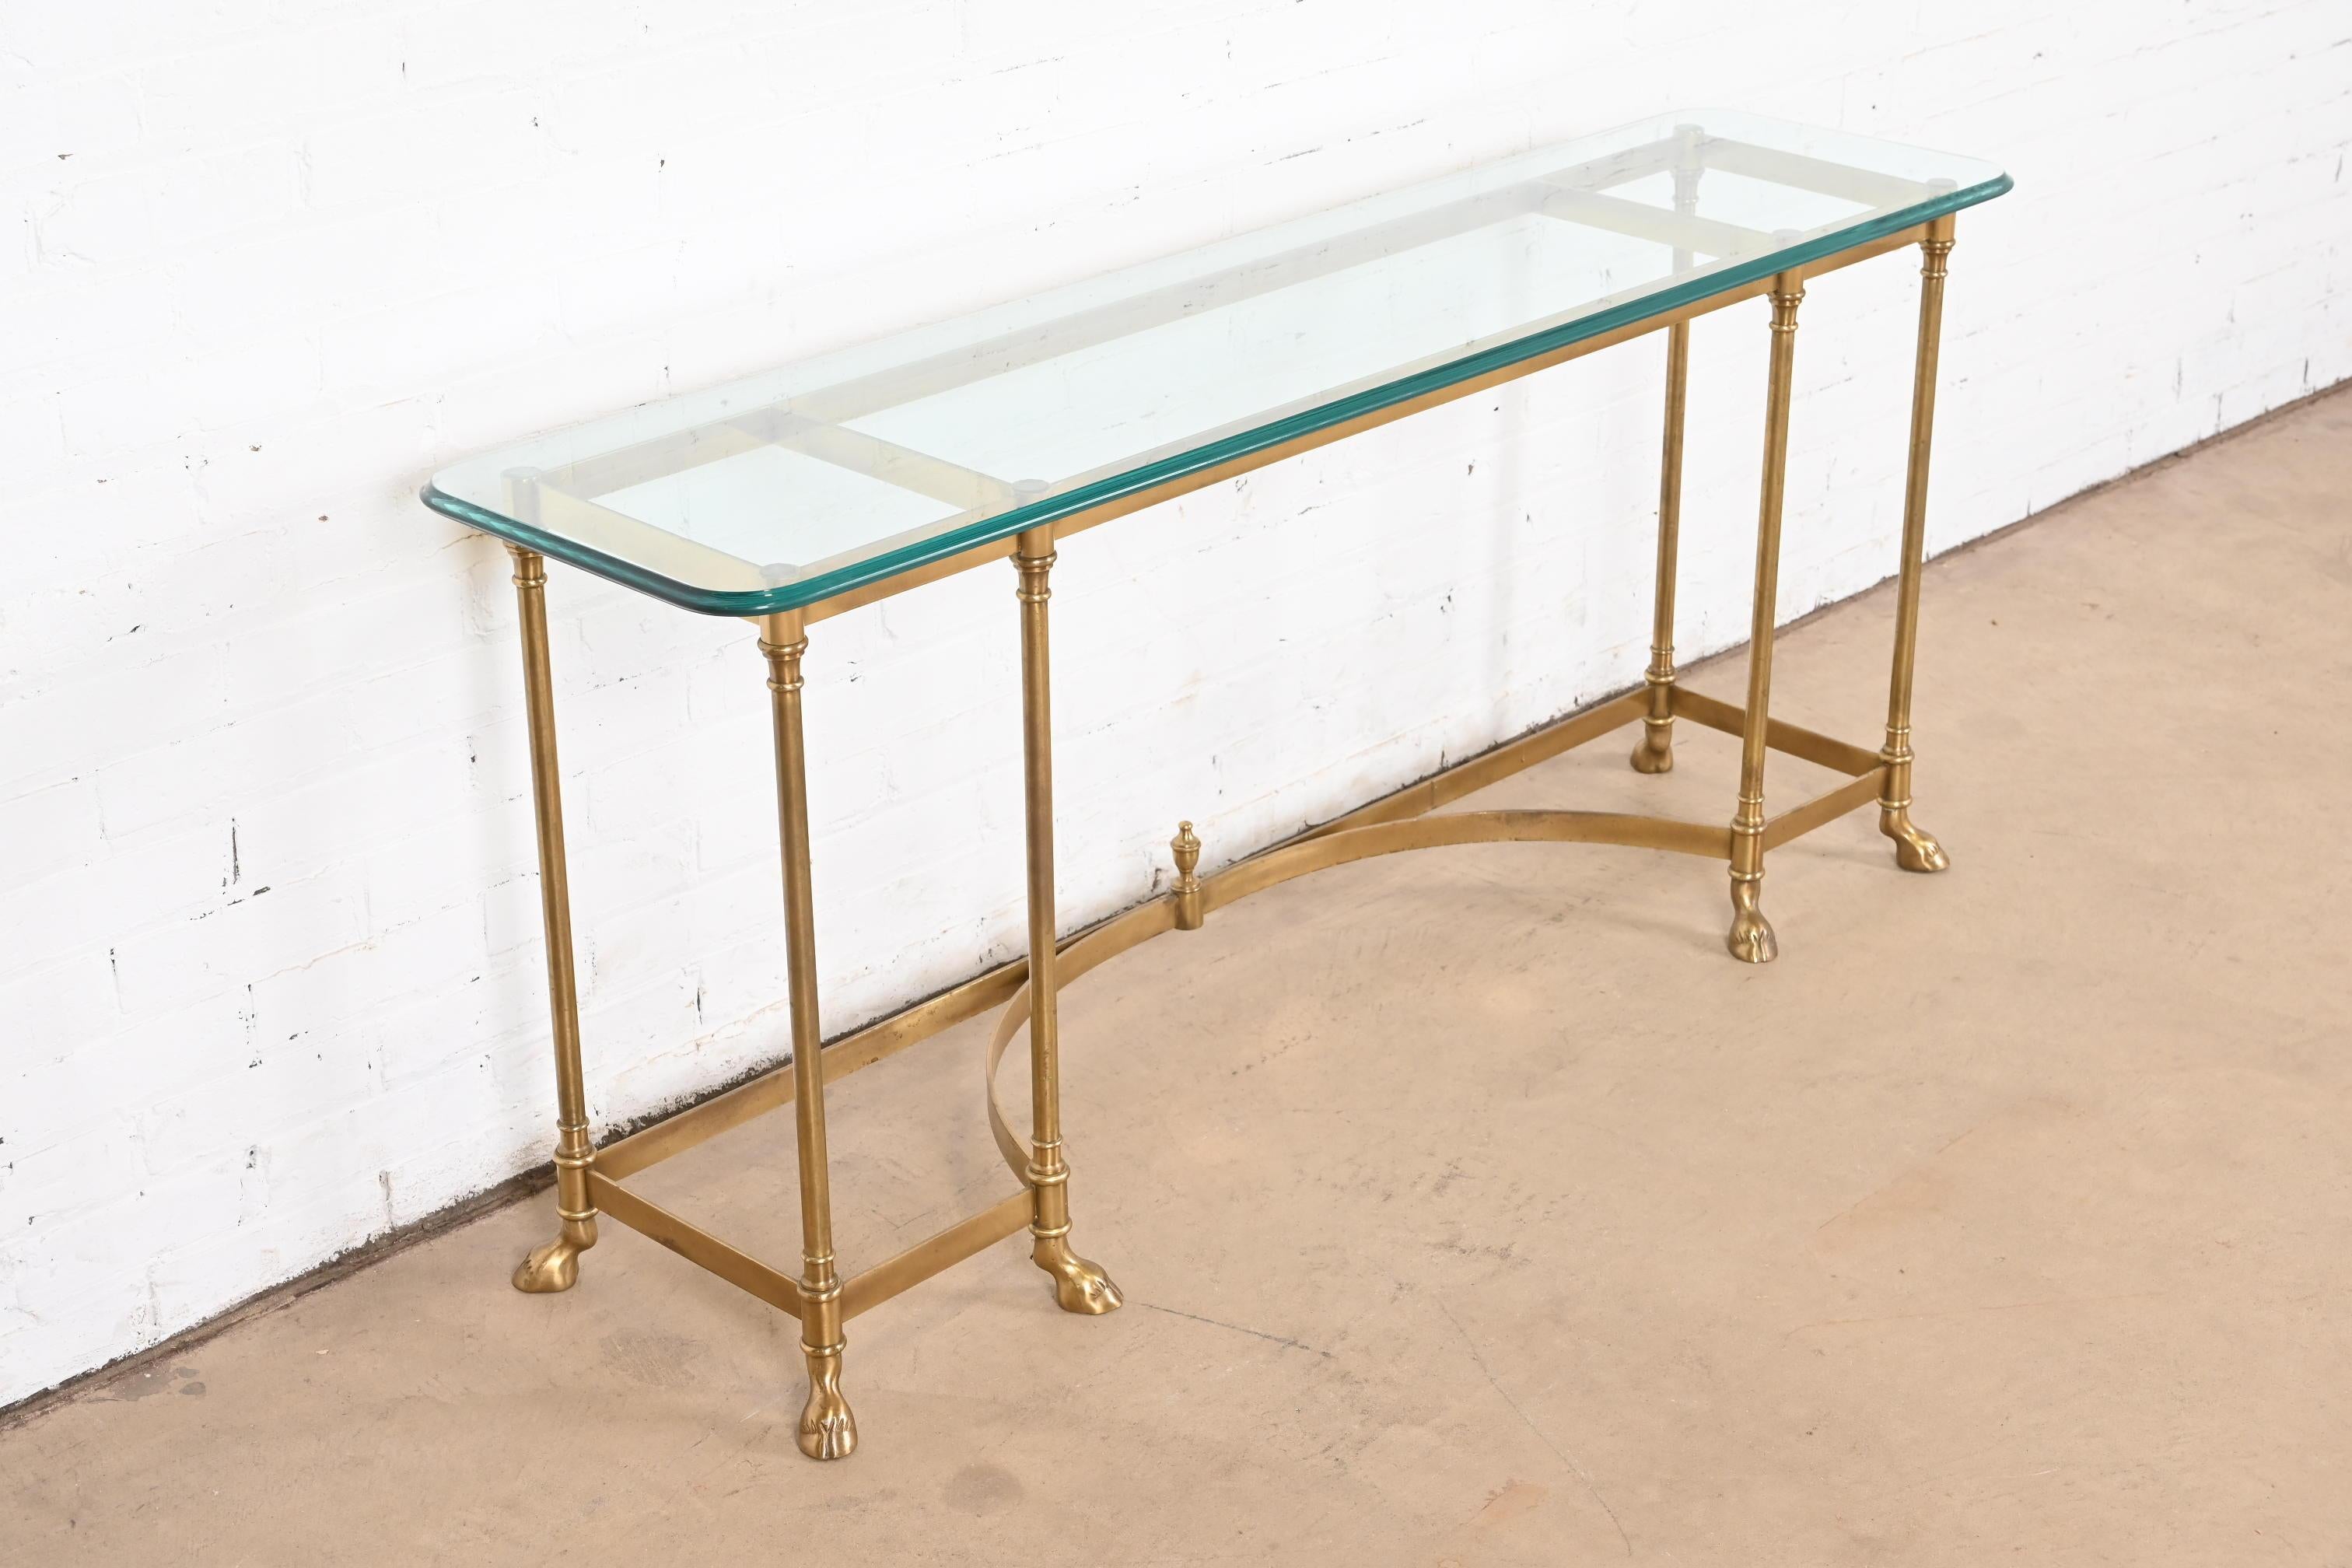 Mid-20th Century Labarge Hollywood Regency Brass and Glass Hooved Feet Console Table, Circa 1960s For Sale